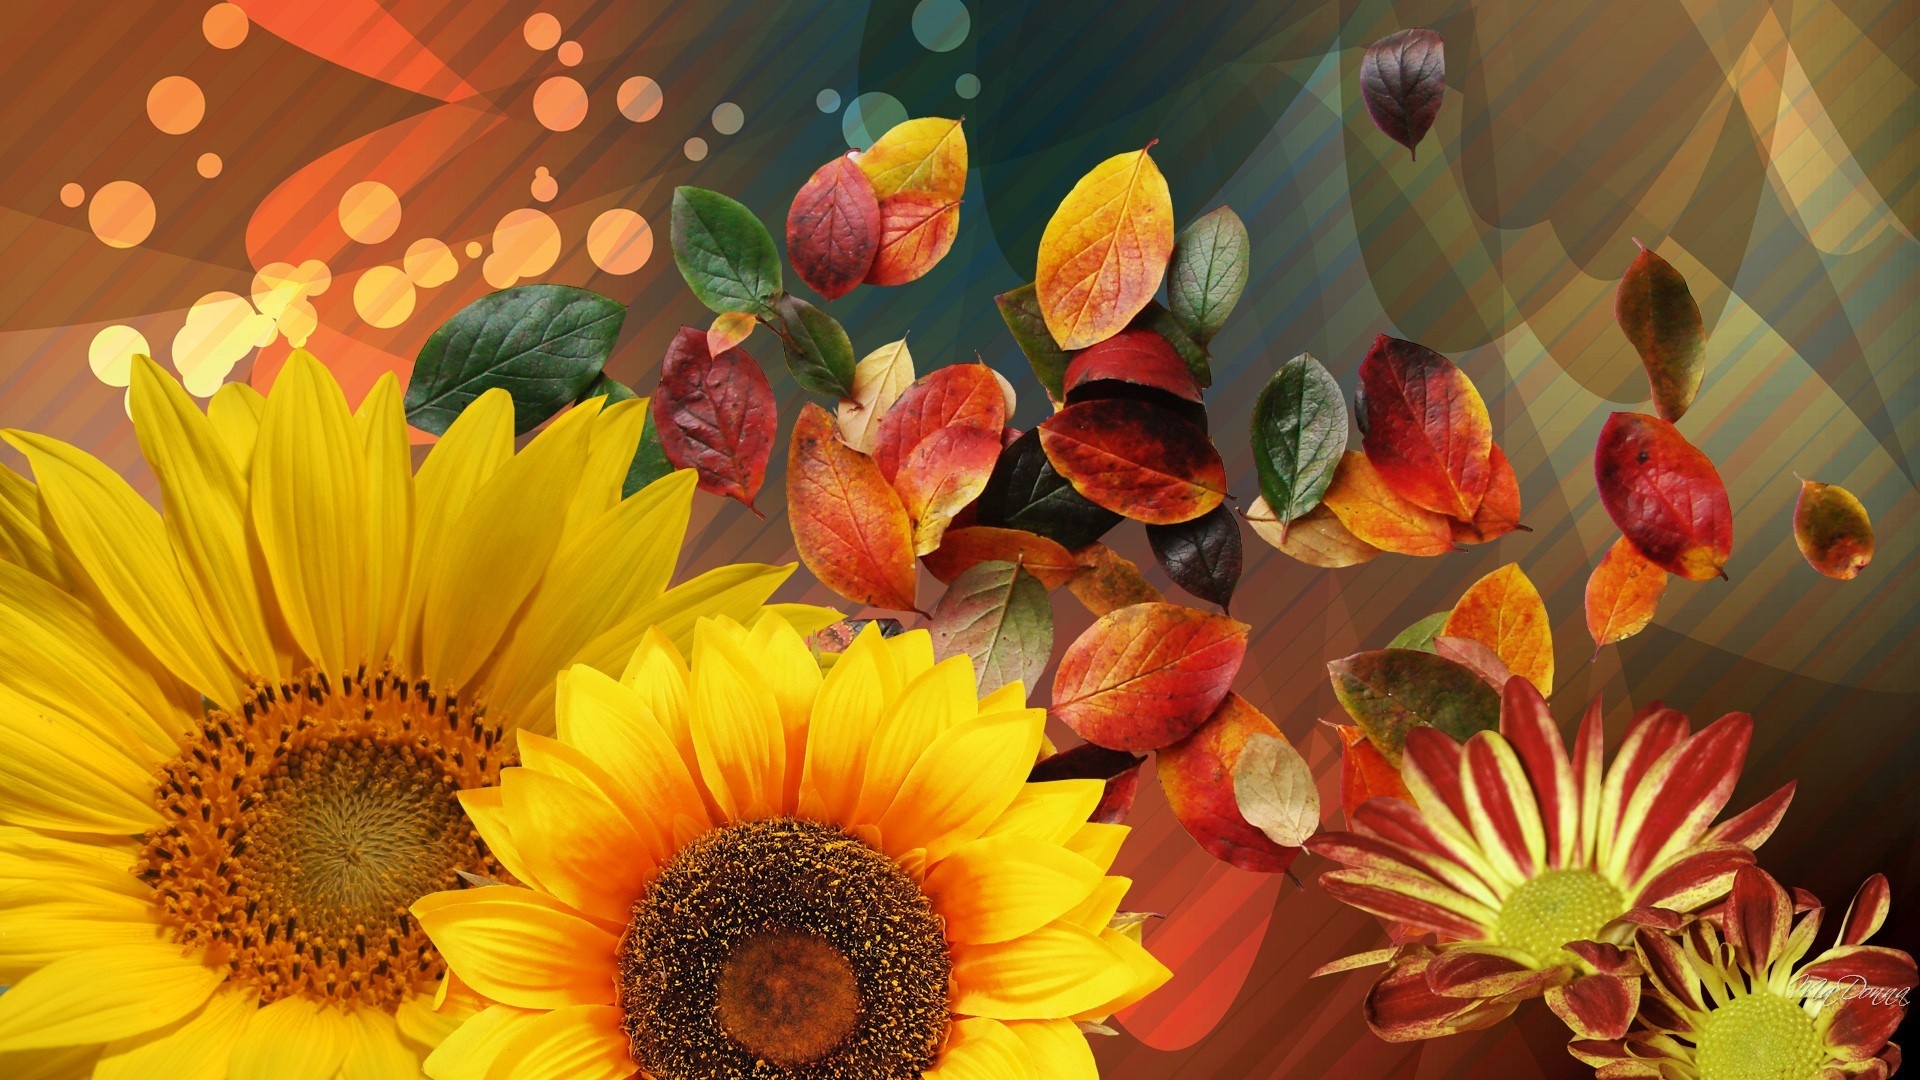 Wallpaper Sunflowers, leaves, collage 1920x1080 Full HD 2K Picture, Image